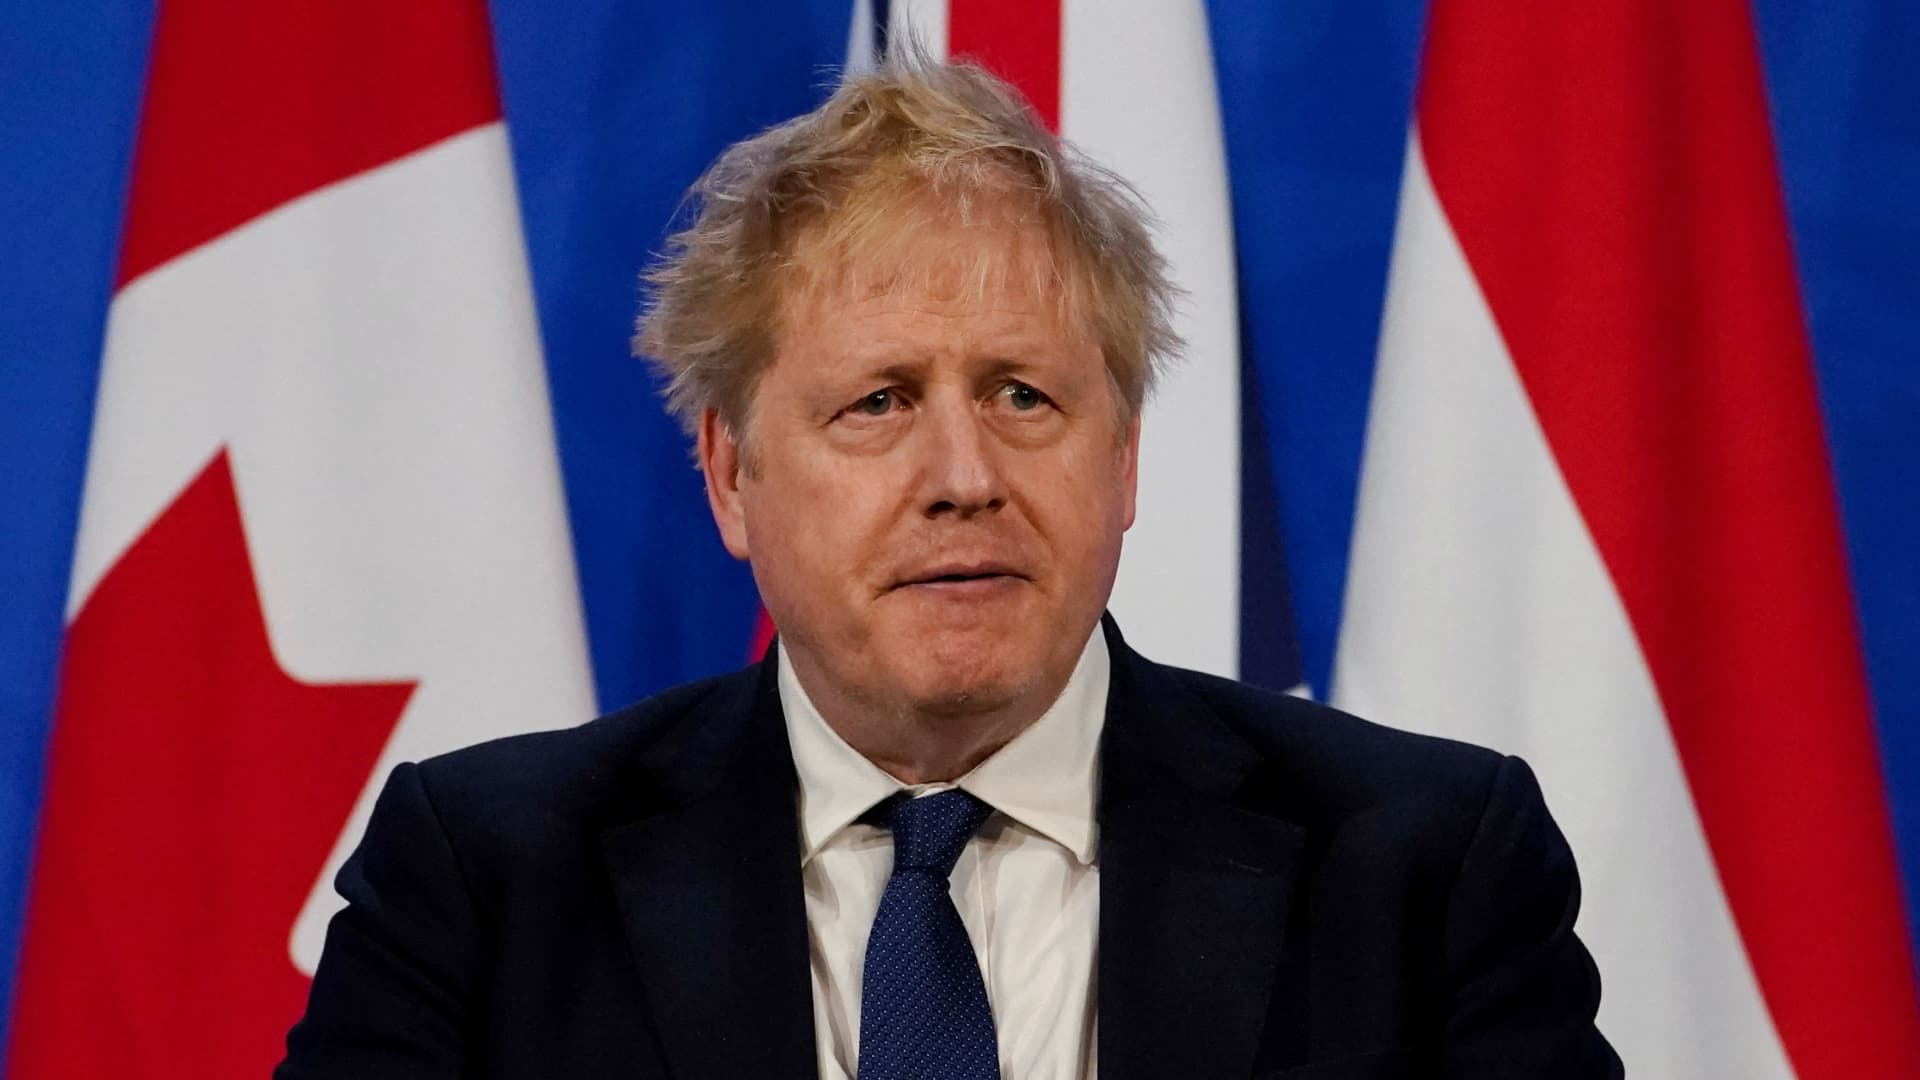 British Prime Minister Boris Johnson speaks during a joint press conference with Dutch Prime Minister Mark Rutte and Canadian Prime Minister Justin Trudeau in London, Britain, March 7, 2022.